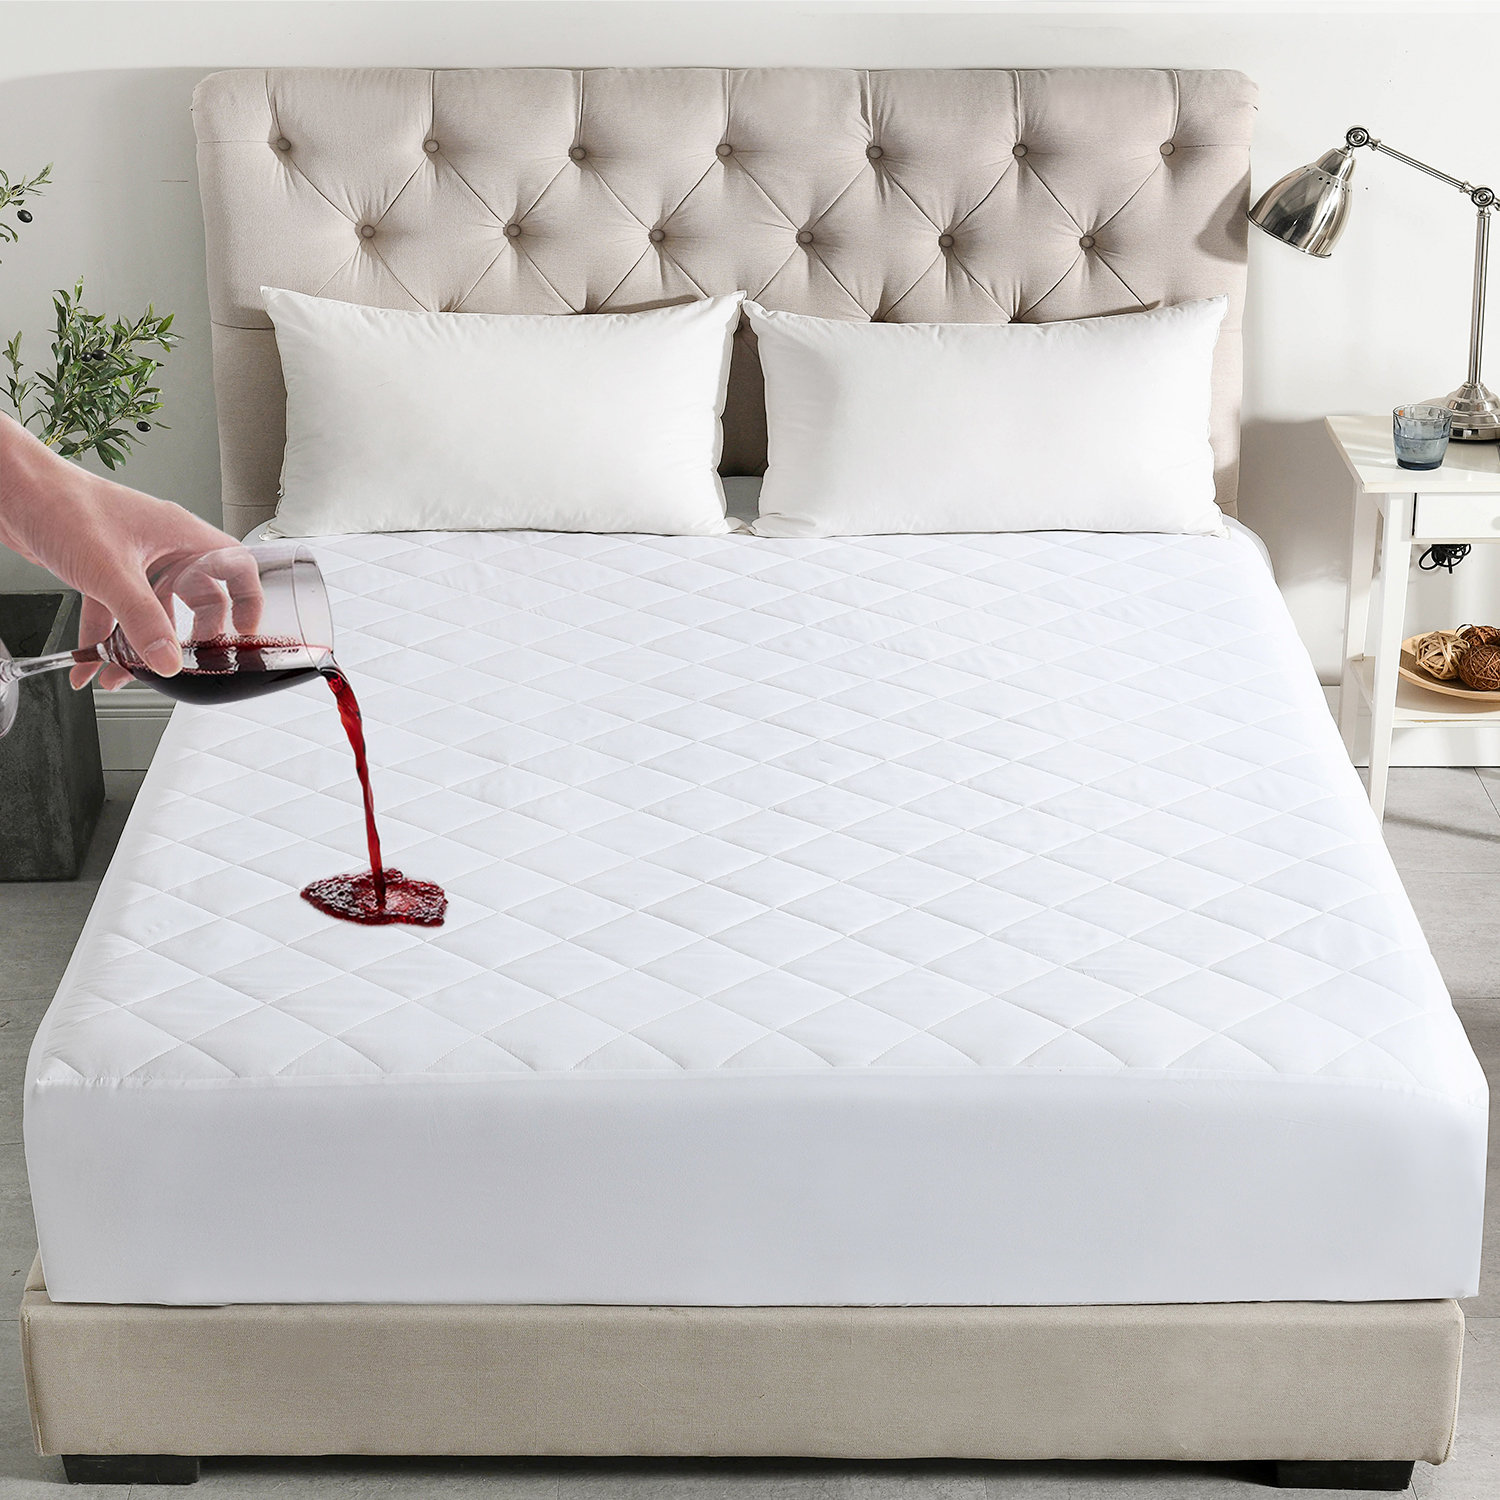 Bamboo Mattress Protector Waterproof Matress Cover Cooling Quilted Fitted Deep 